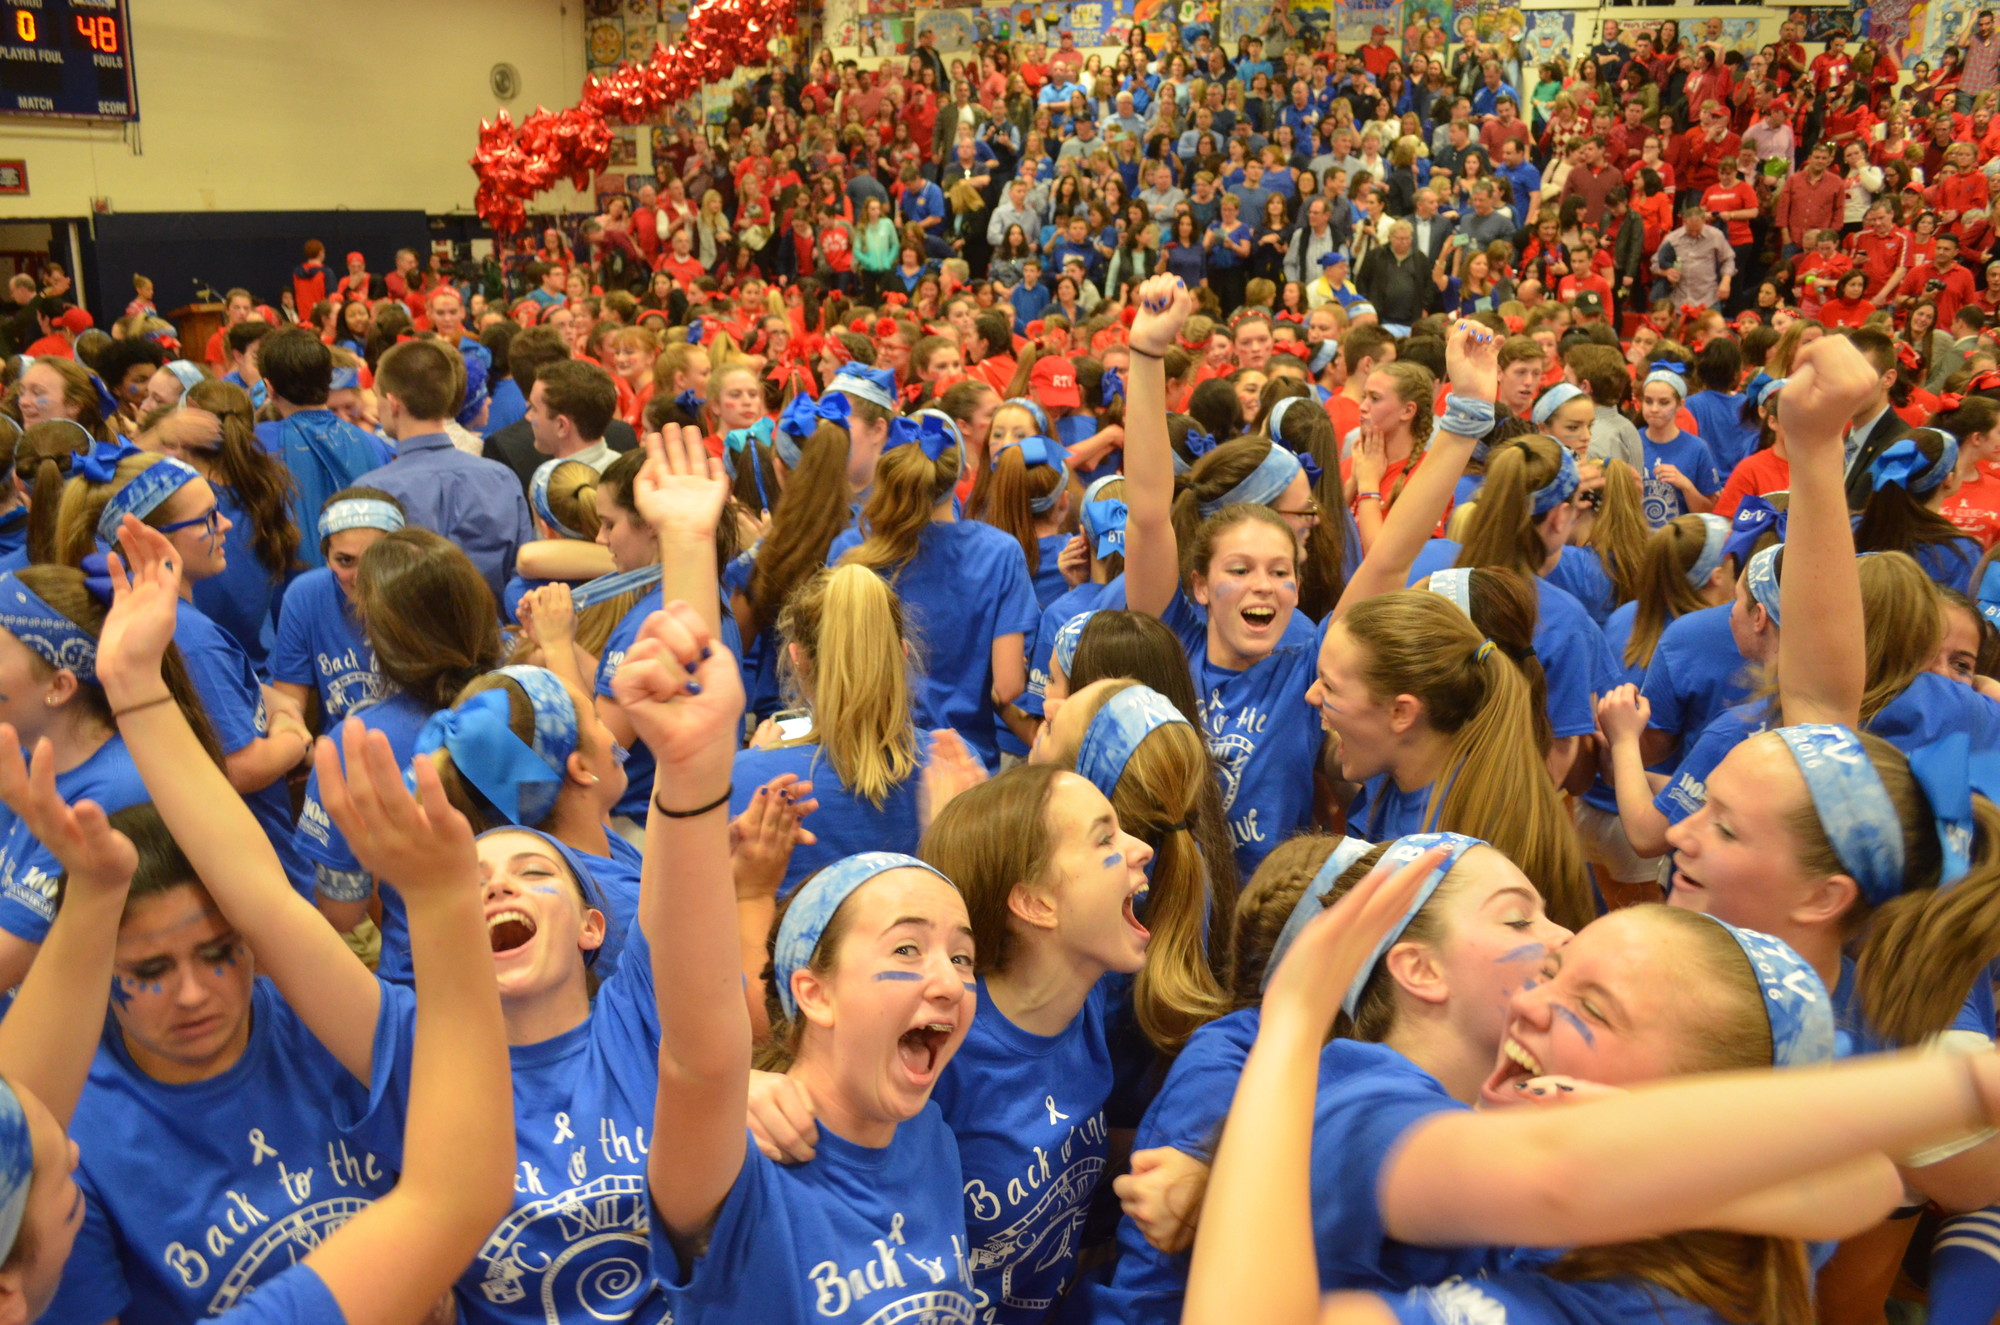 Blue celebrated its victory at the 100th Red and Blue.